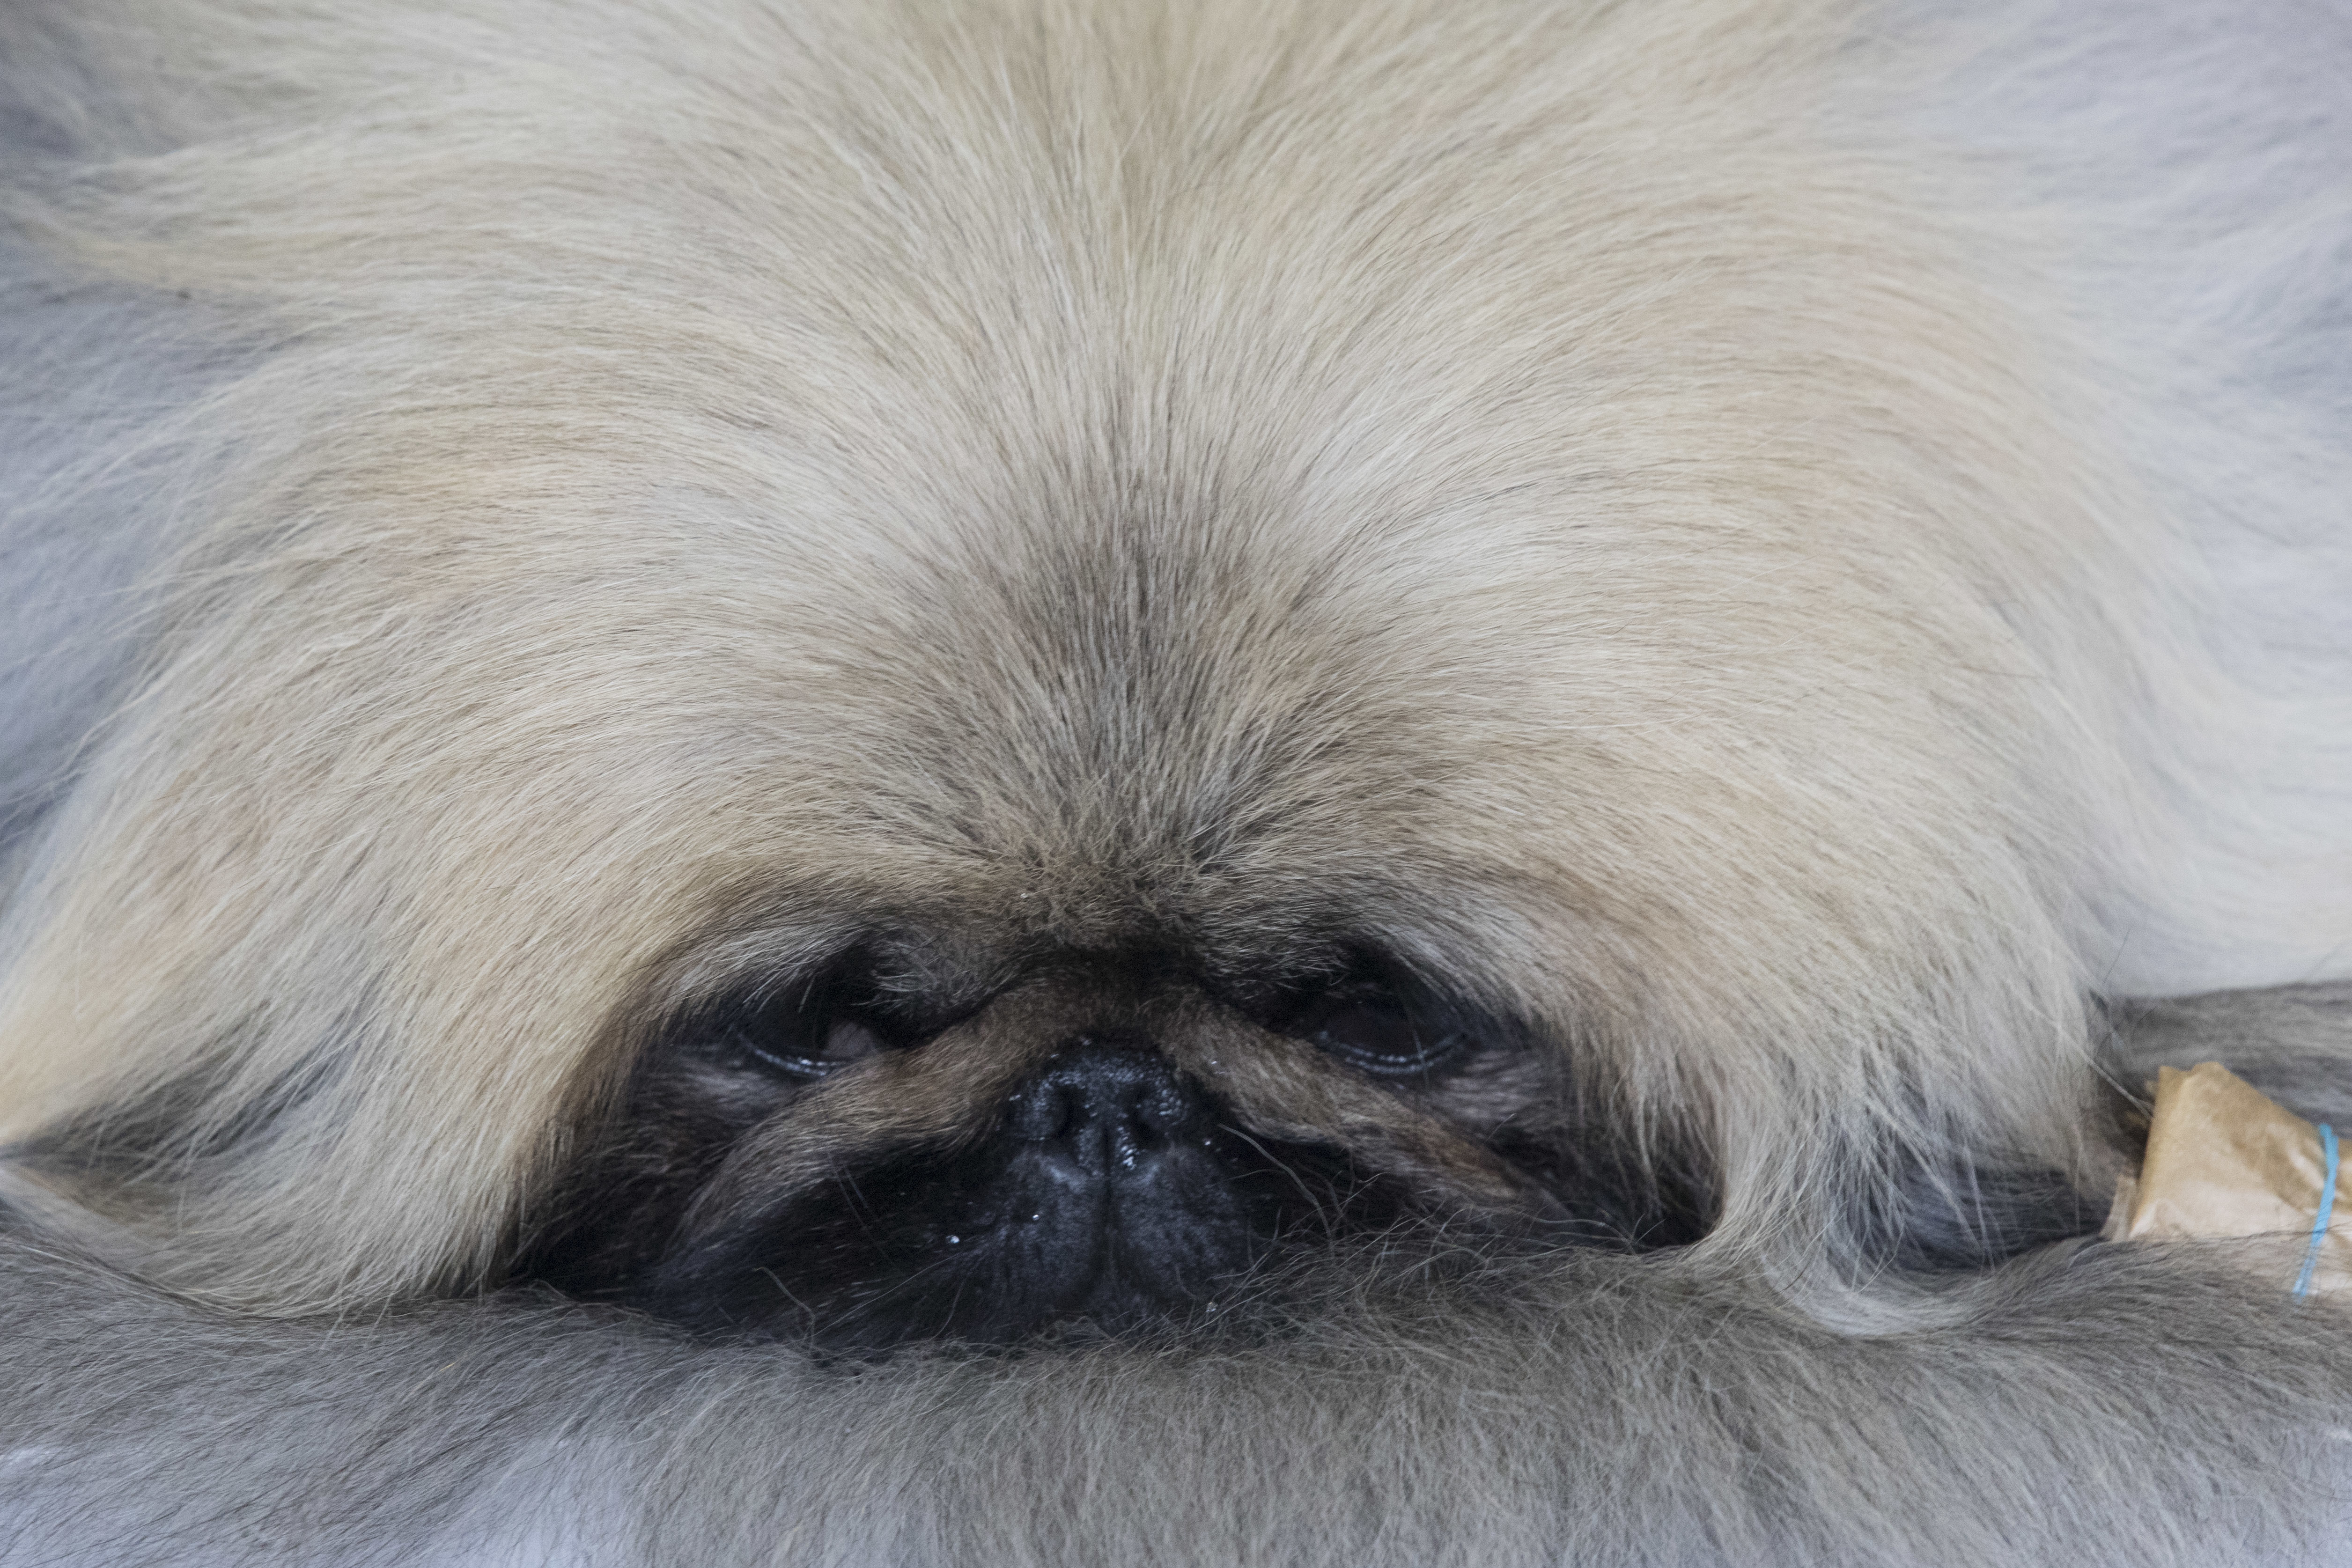 A Pekingese rests in the staging area during the 141st Westminster Kennel Club Dog Show, Monday, Feb. 13, 2017, in New York. (AP Photo/Mary Altaffer)